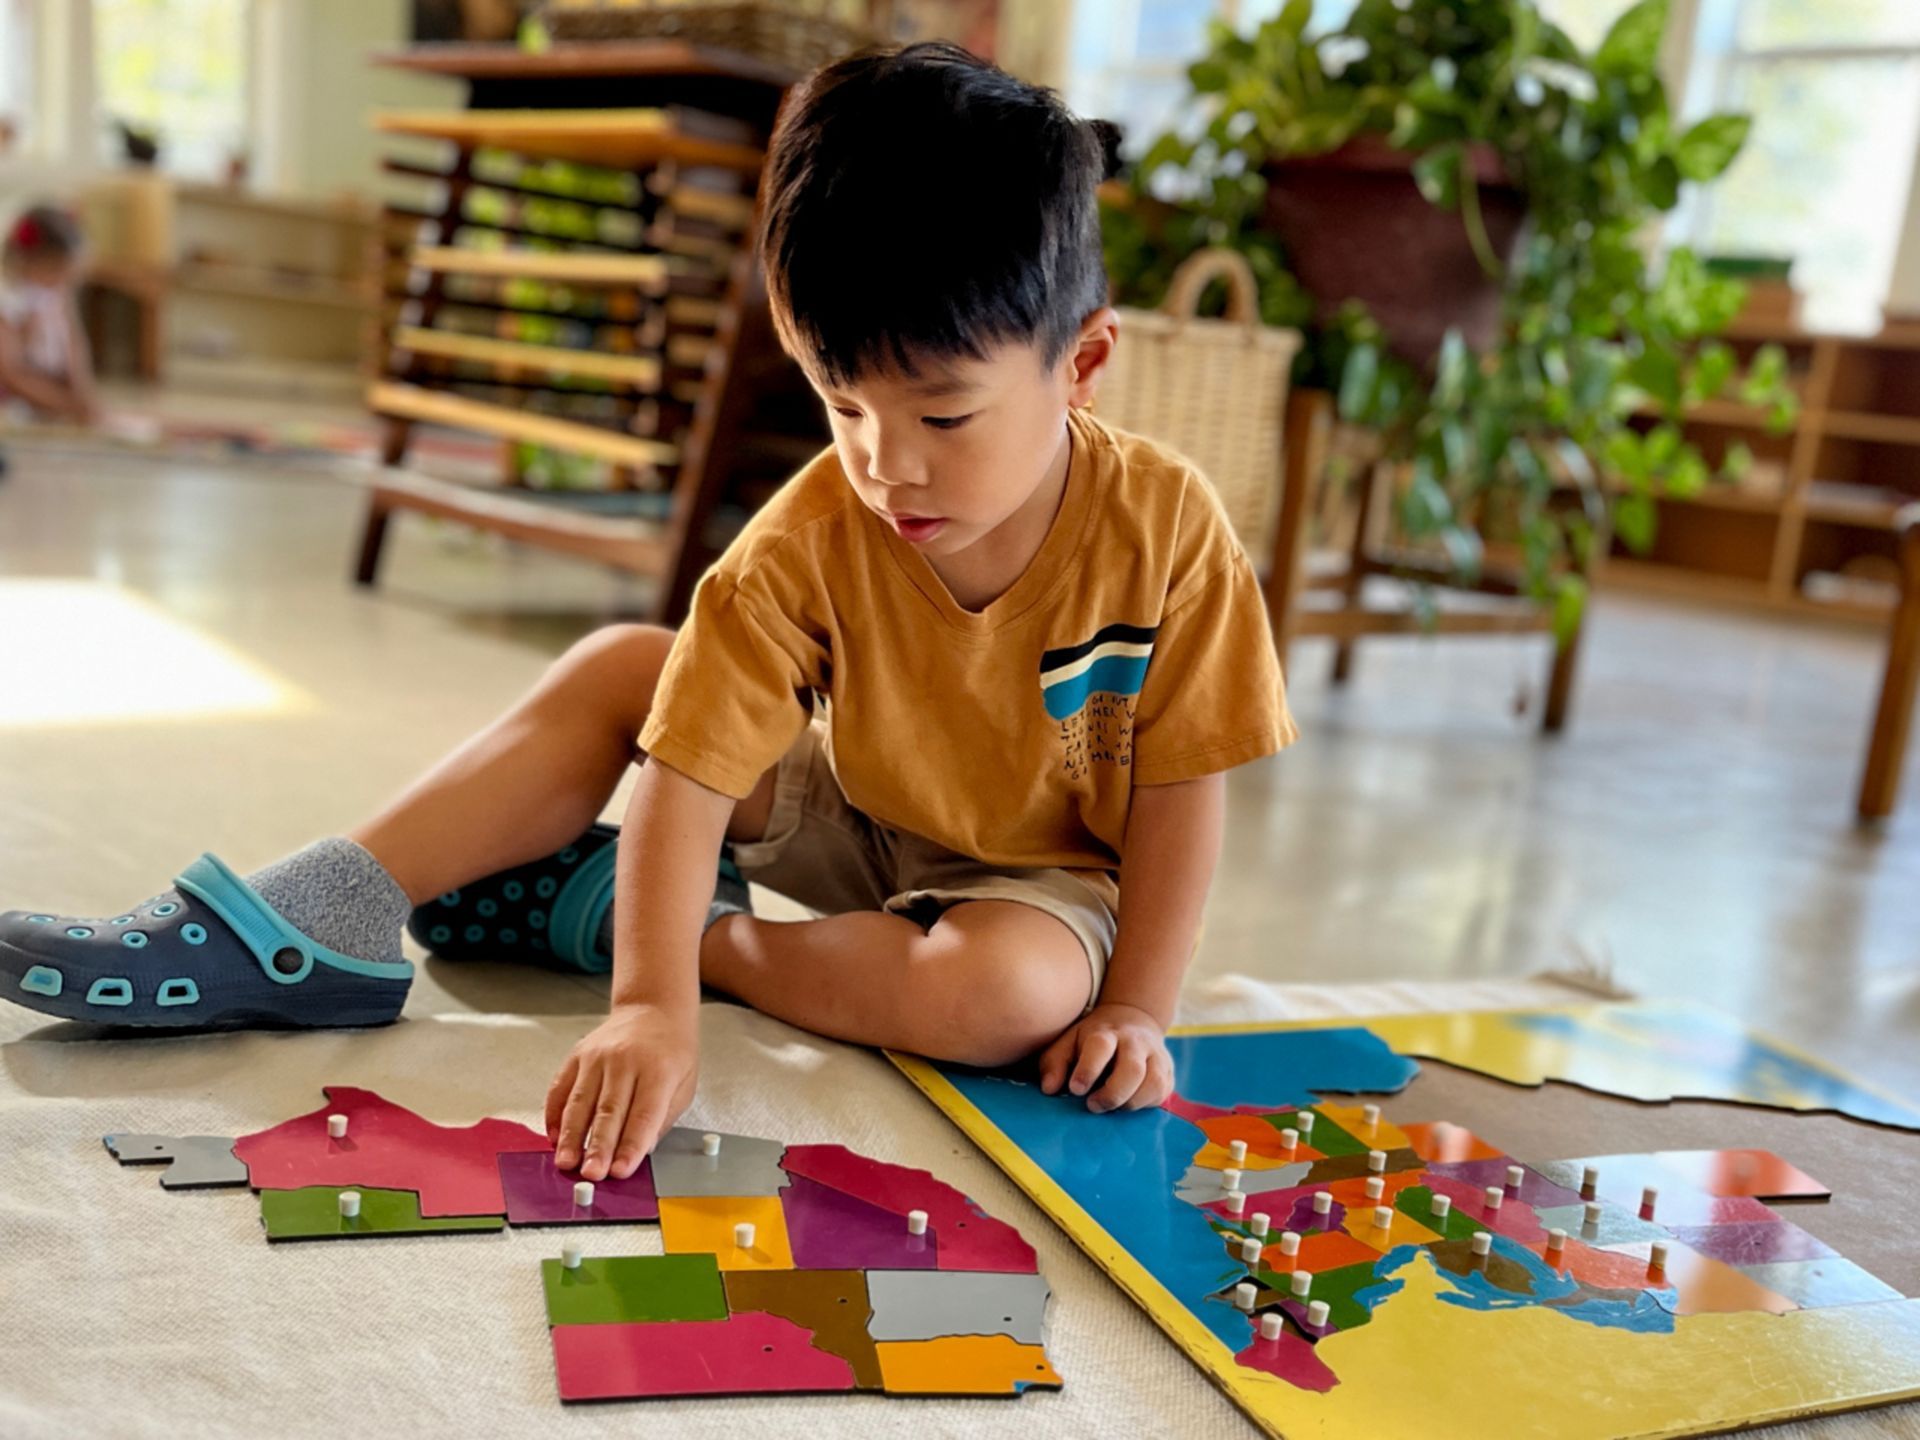 A hild working with Montessori materials